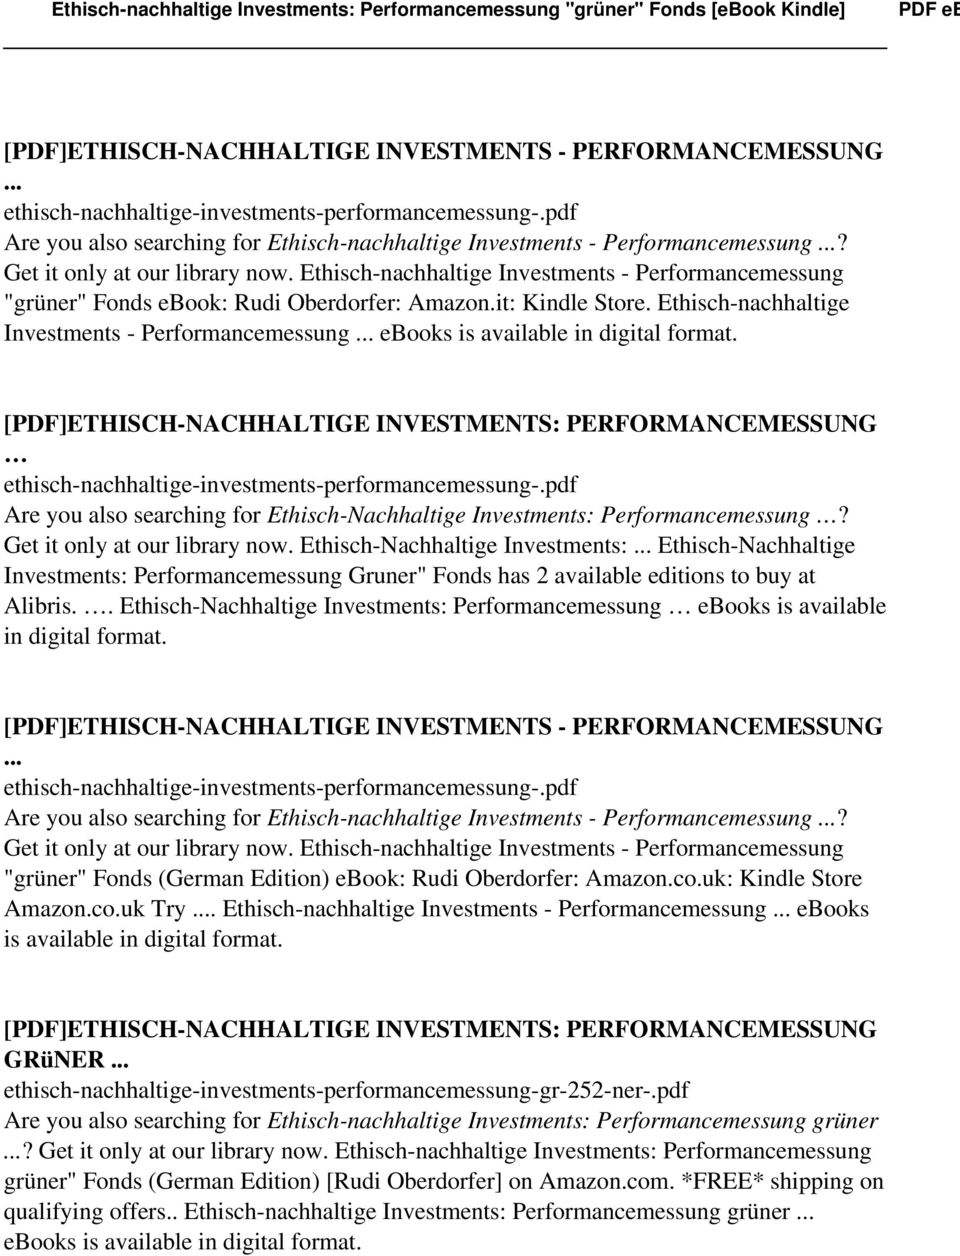 Ethisch-nachhaltige Investments - Performancemessung ebooks is available in digital Are you also searching for Ethisch-Nachhaltige Investments: Performancemessung? Get it only at our library now.